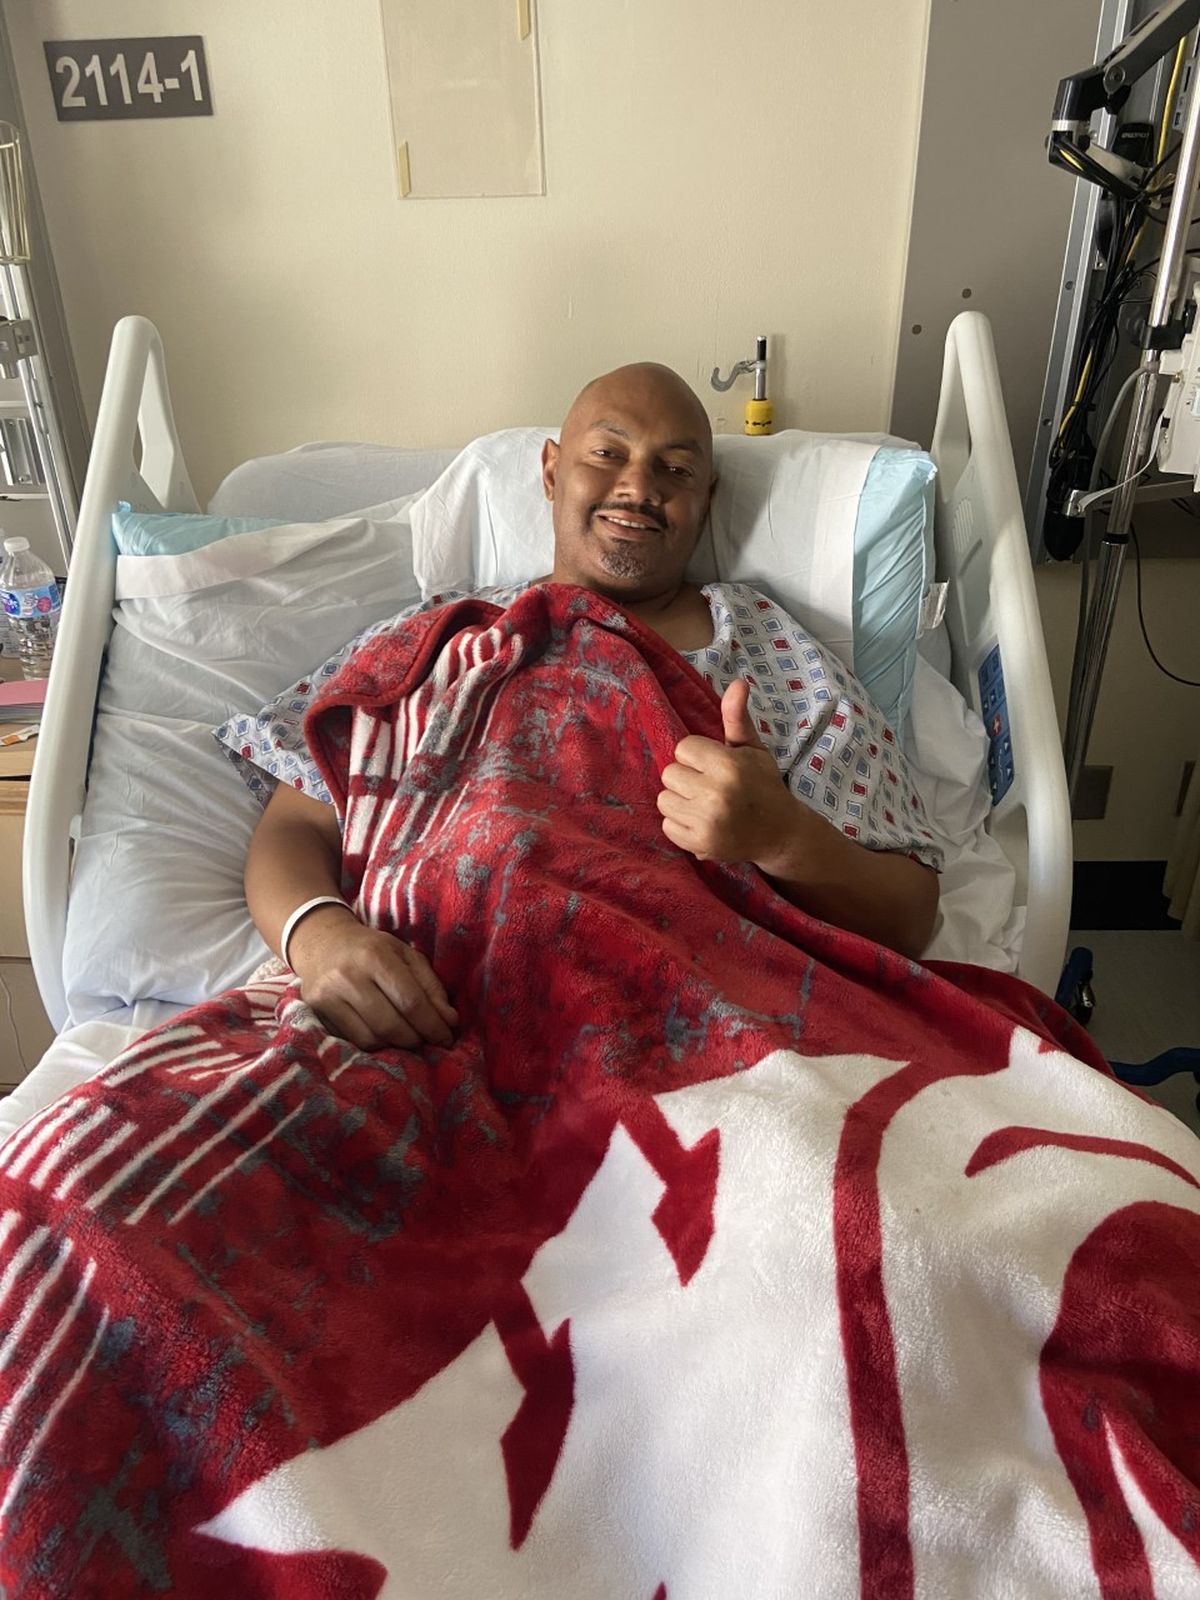 Former Washington State running back Derek Sparks has a piece of his alma mater with him as he rests in a hospital bed in Houston. Sparks is battling pancreatic cancer after being diagnosed with the disease in August.  (Derek Sparks/Courtesy)